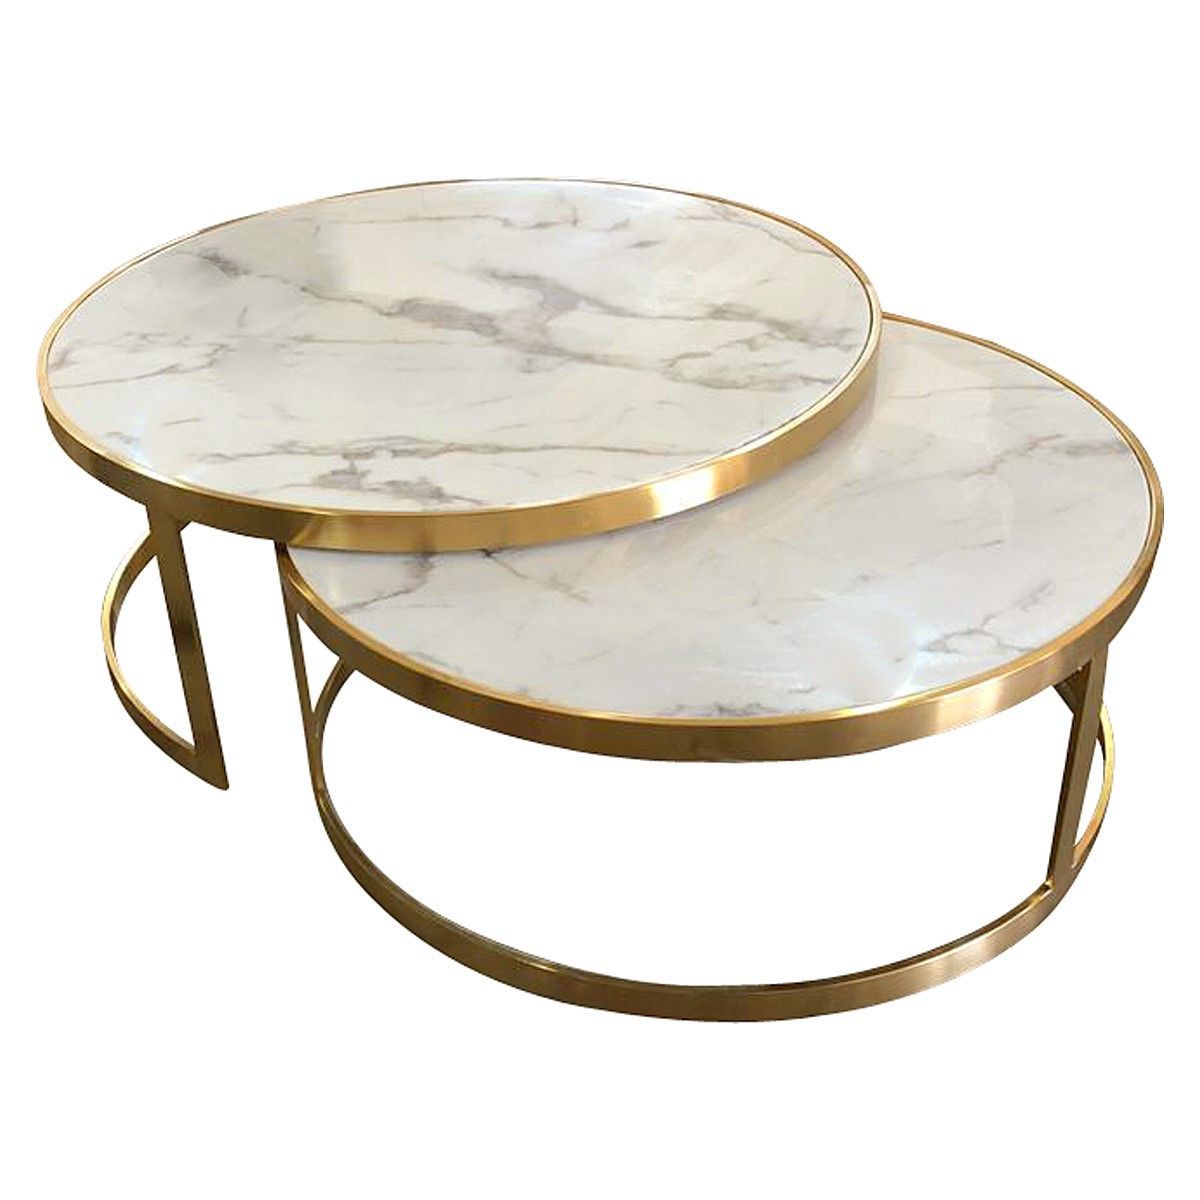 Mirabello 2 Piece Faux Marble Topped Metal Round Nesting Coffee Table Pertaining To Modern Round Faux Marble Coffee Tables (View 11 of 15)